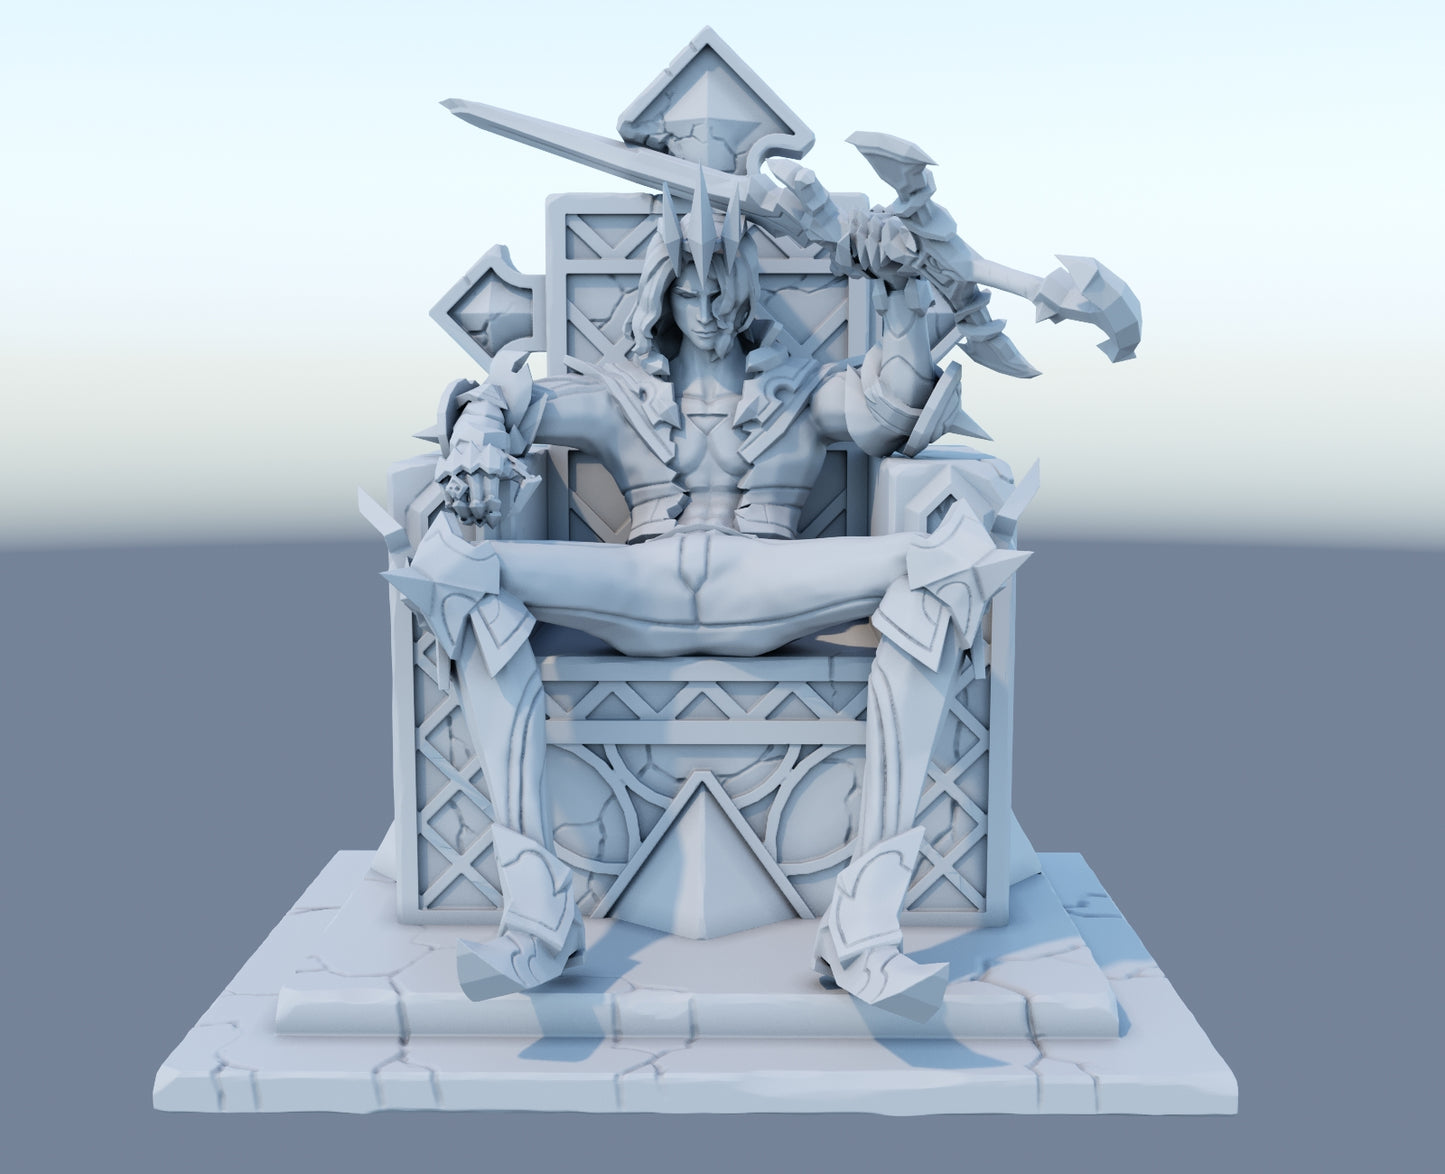 Viego 3D-printed League of Legends champion figure. Decorate your gaming setup or home with your favorite League of Legends champion! Choose between the unpainted version, perfect for you to paint yourself, or the hand-painted version by a professional painter. Order your figure today!